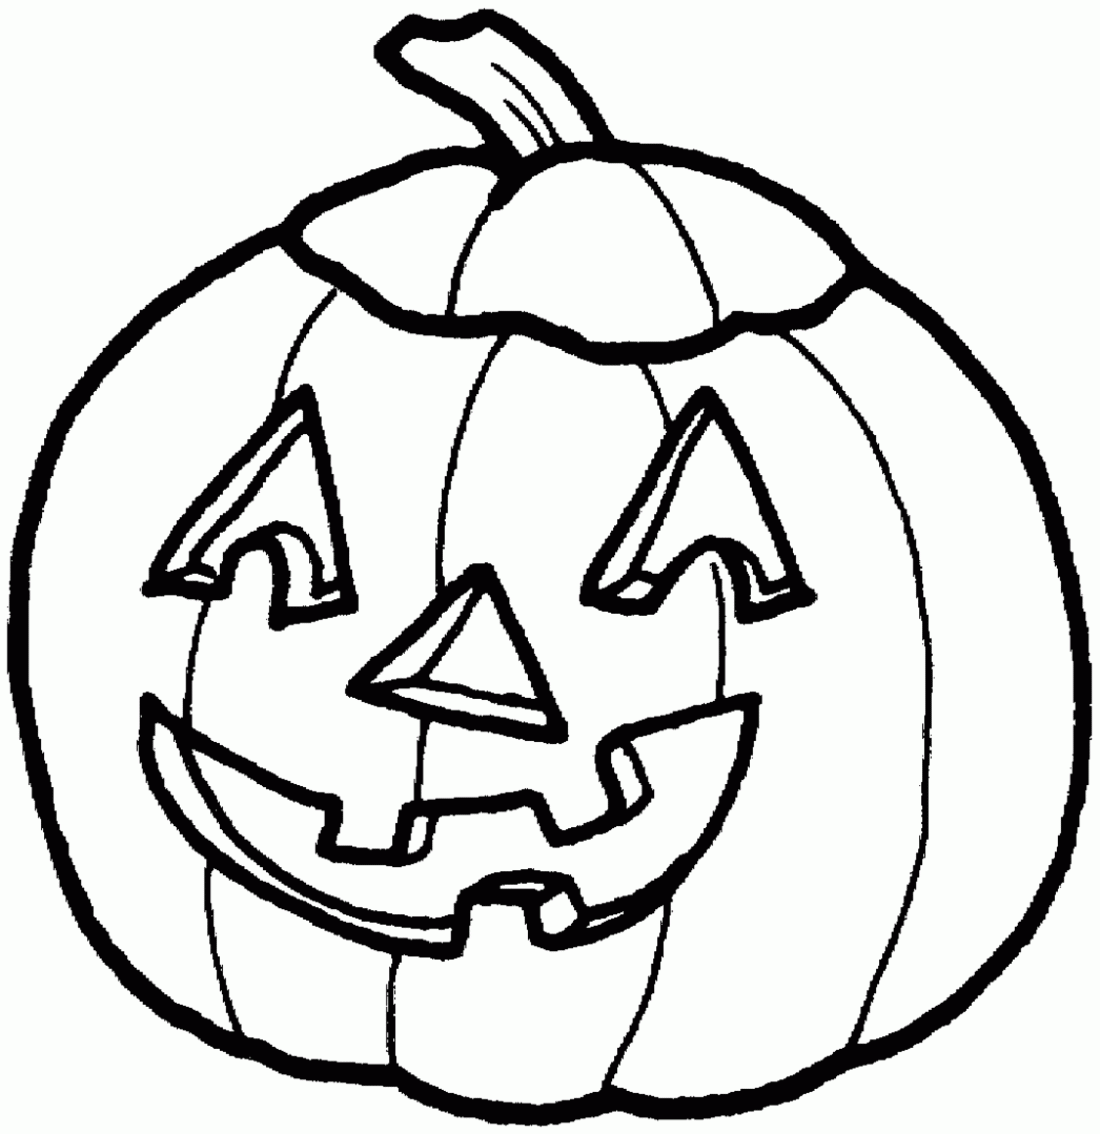 pumpkin pictures to print free printable pumpkin coloring pages for kids cool2bkids pictures pumpkin to print 